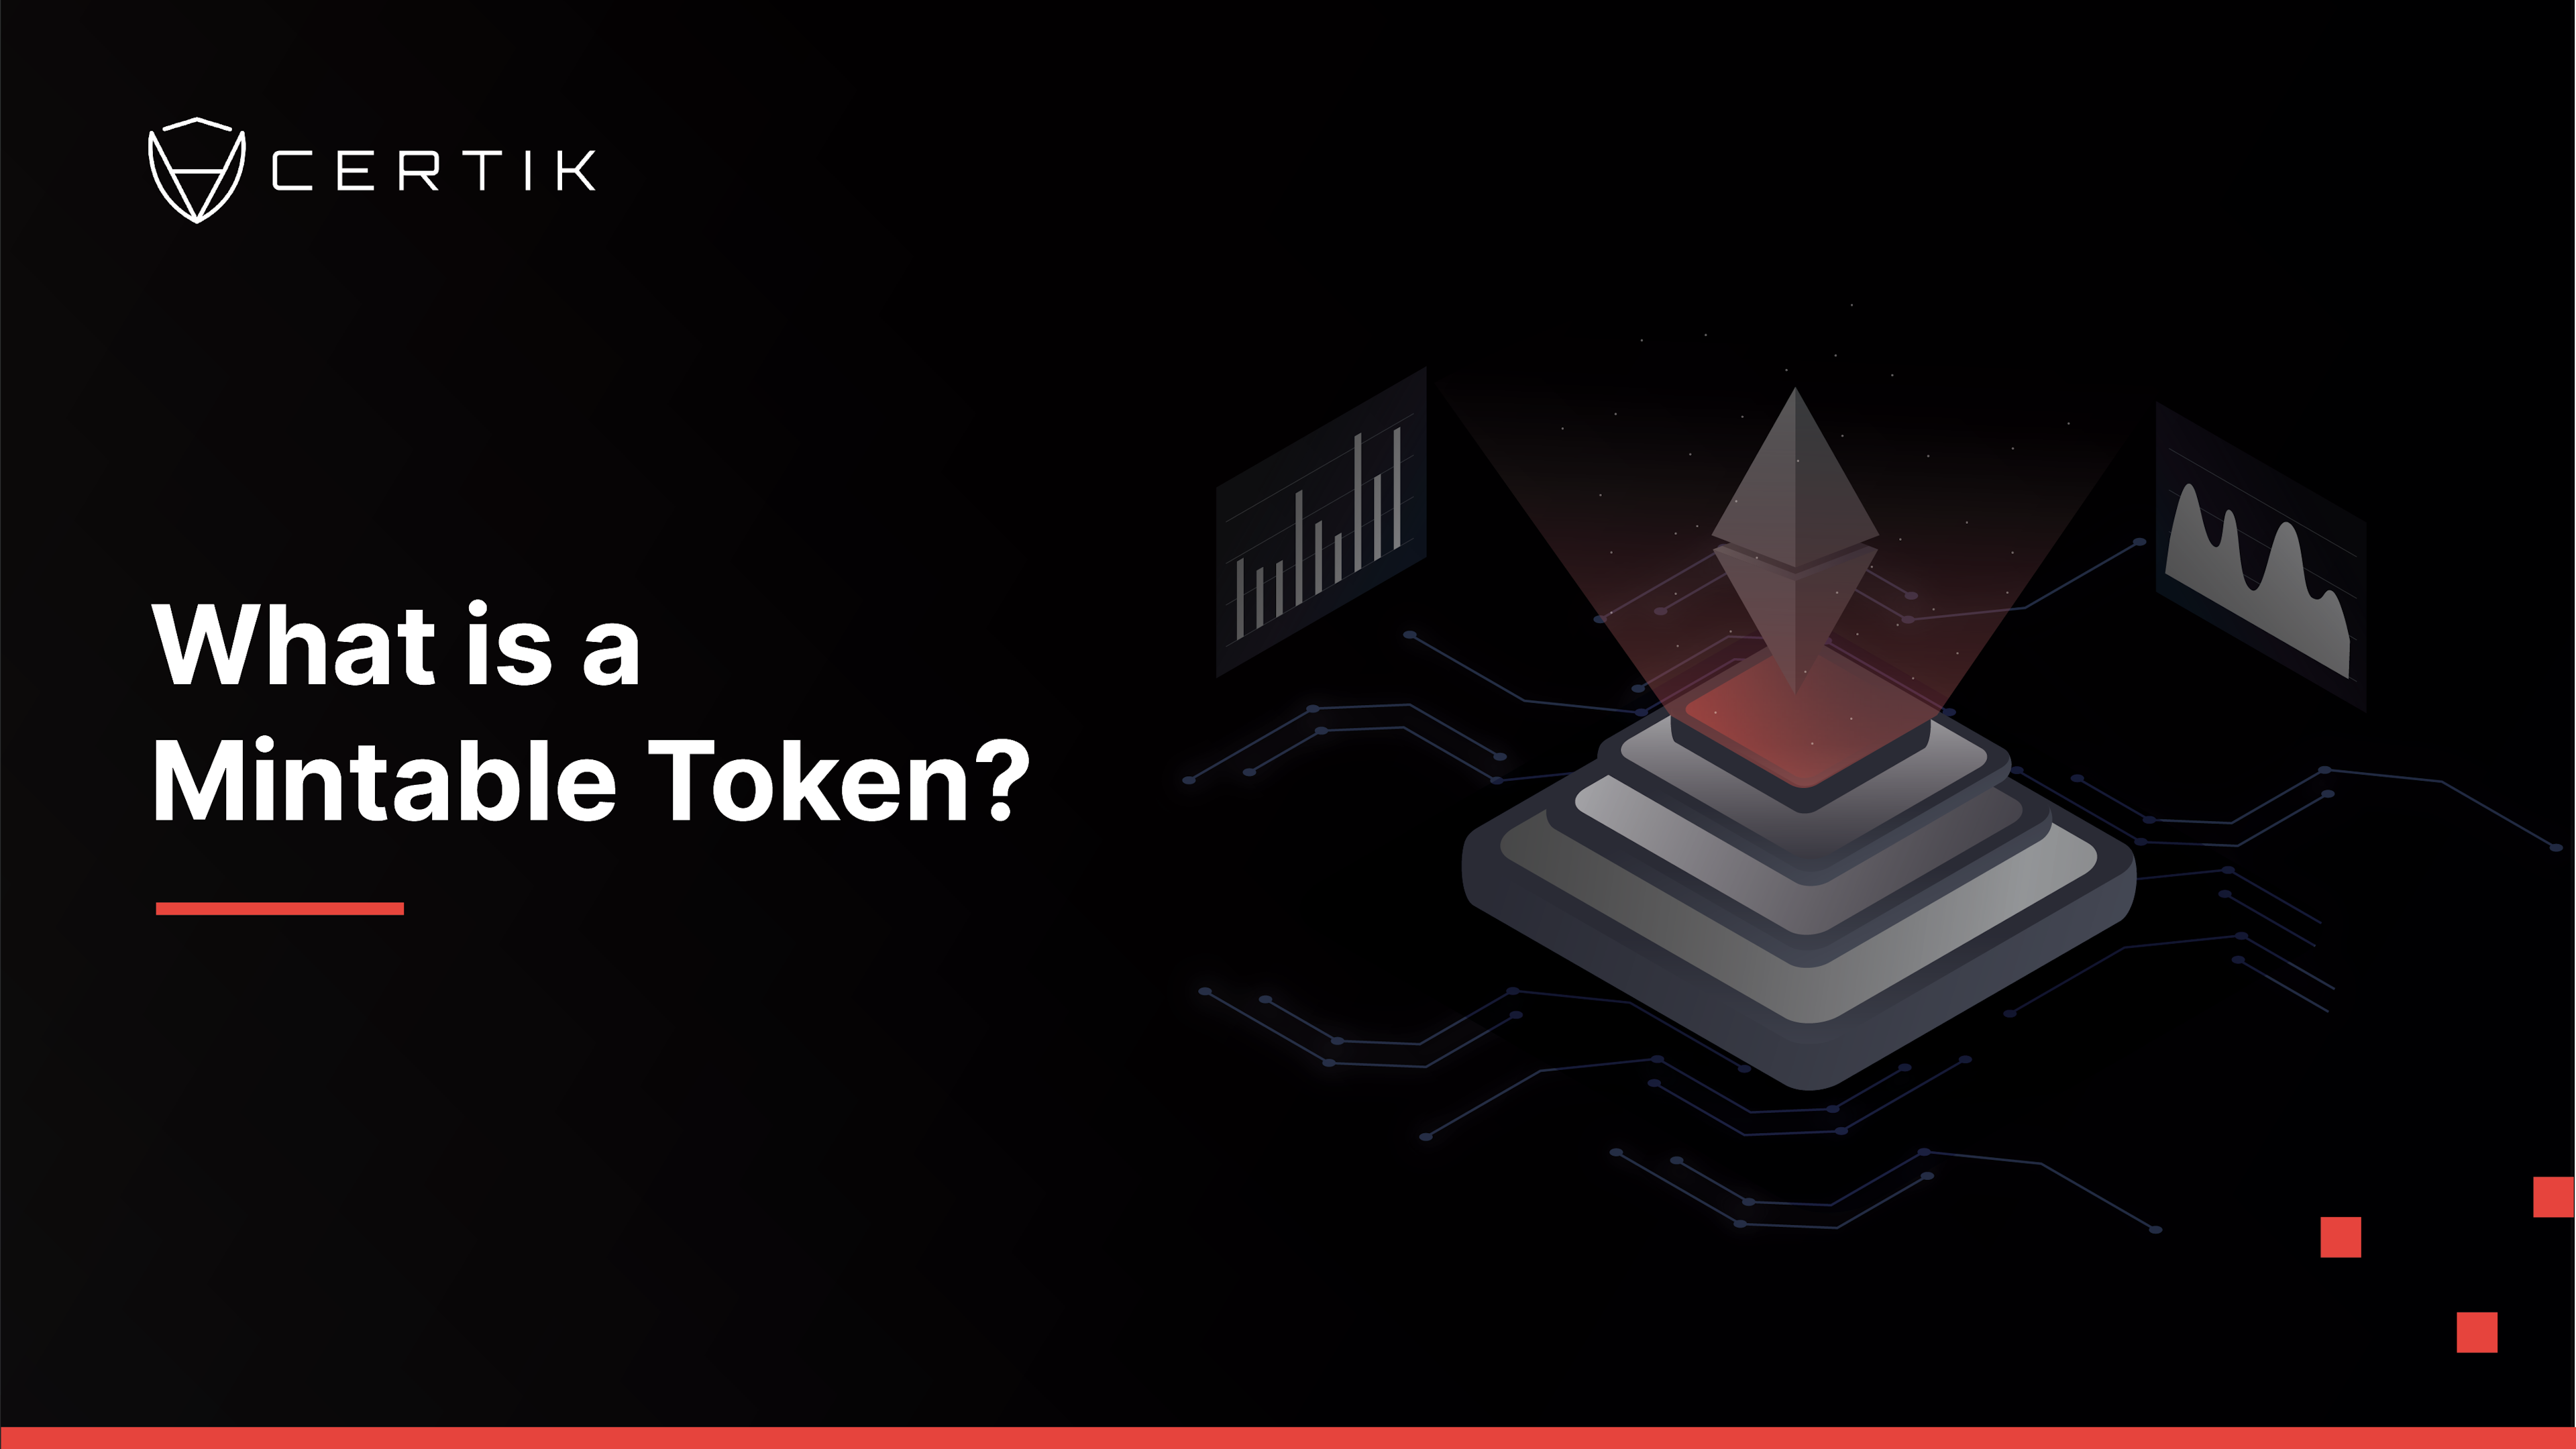 What is a Mintable Token?